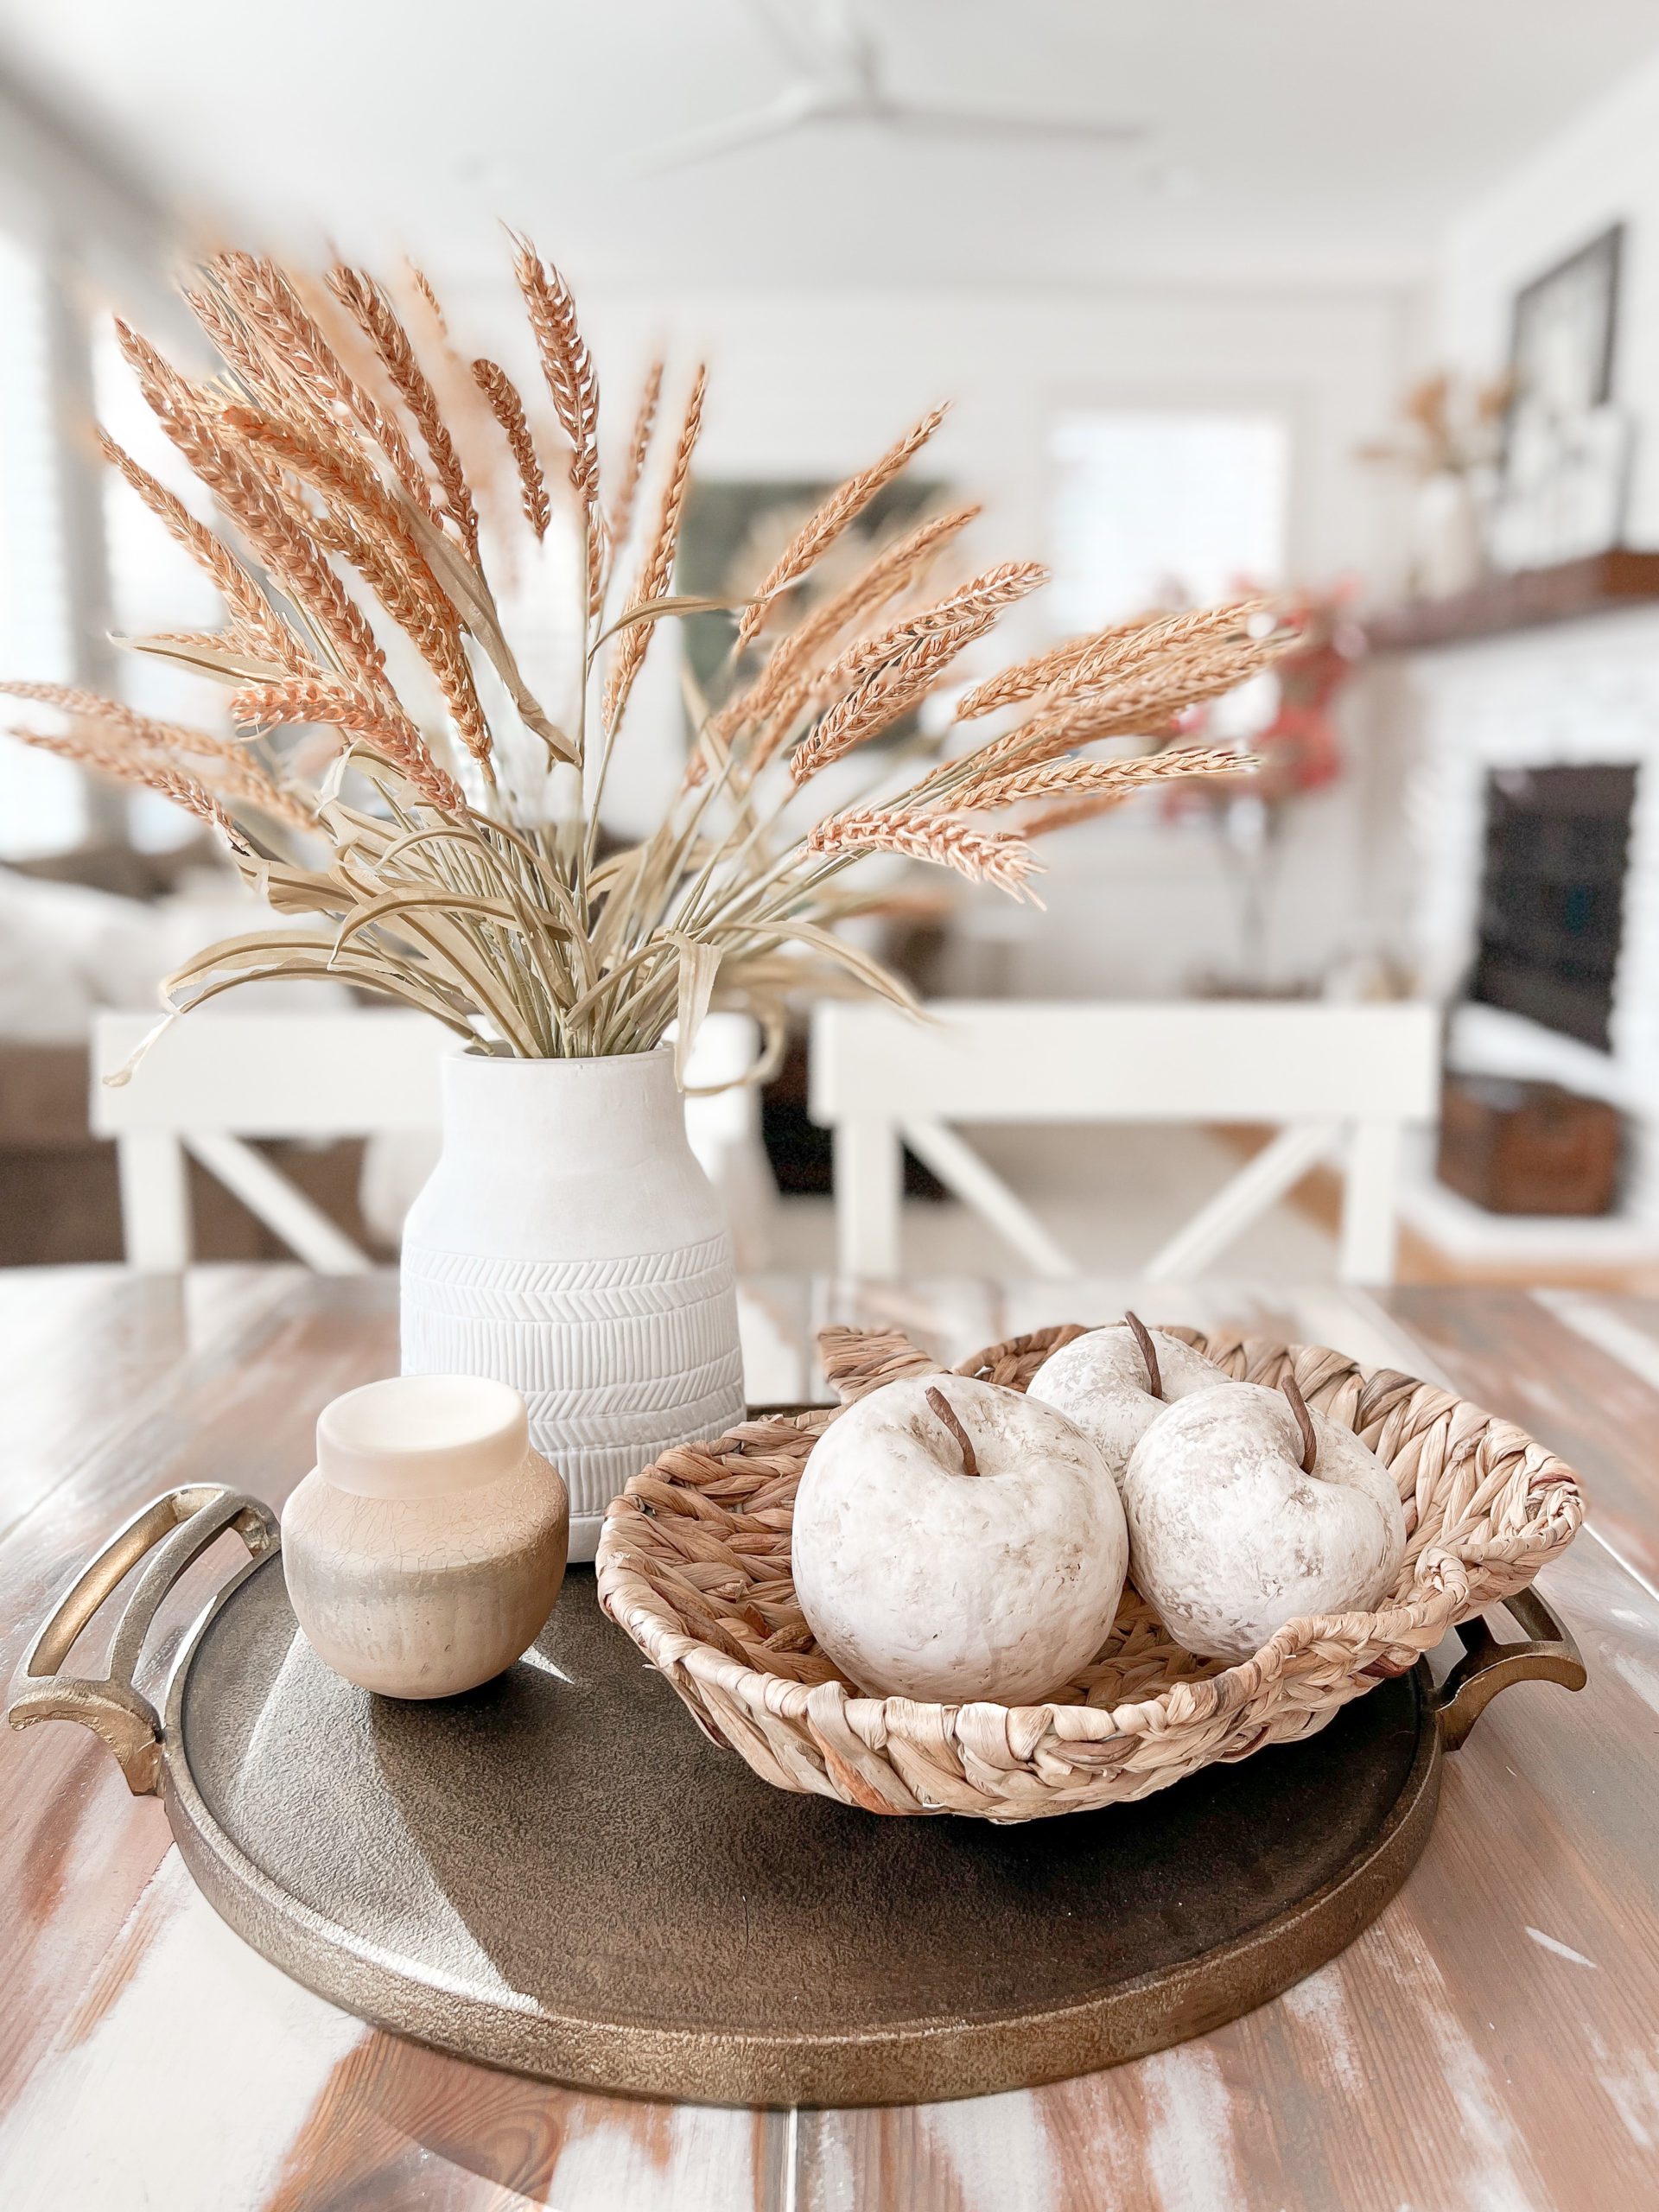 Easy Ways to Add Fall Decor to the Kitchen